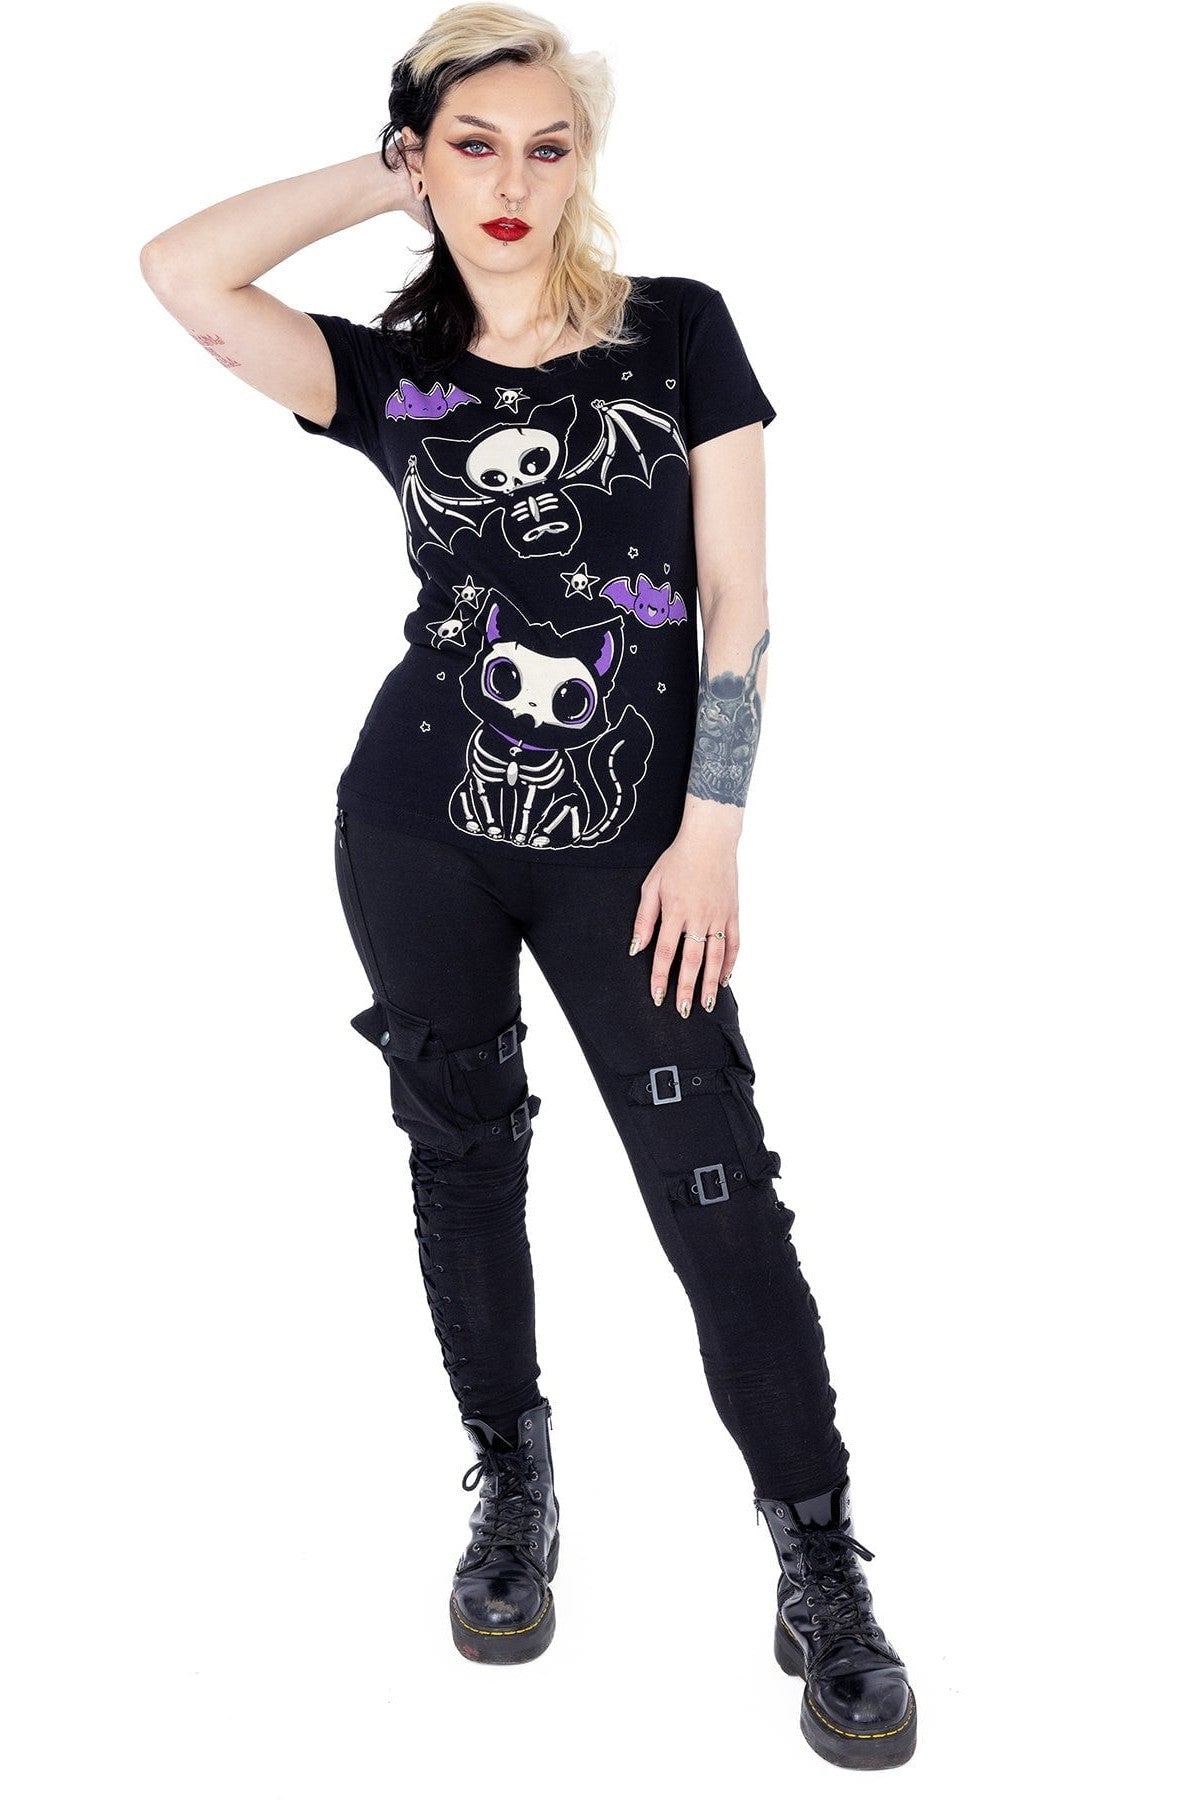 Cupcake Cult Skelly Cat Gothic Punk T-shirt